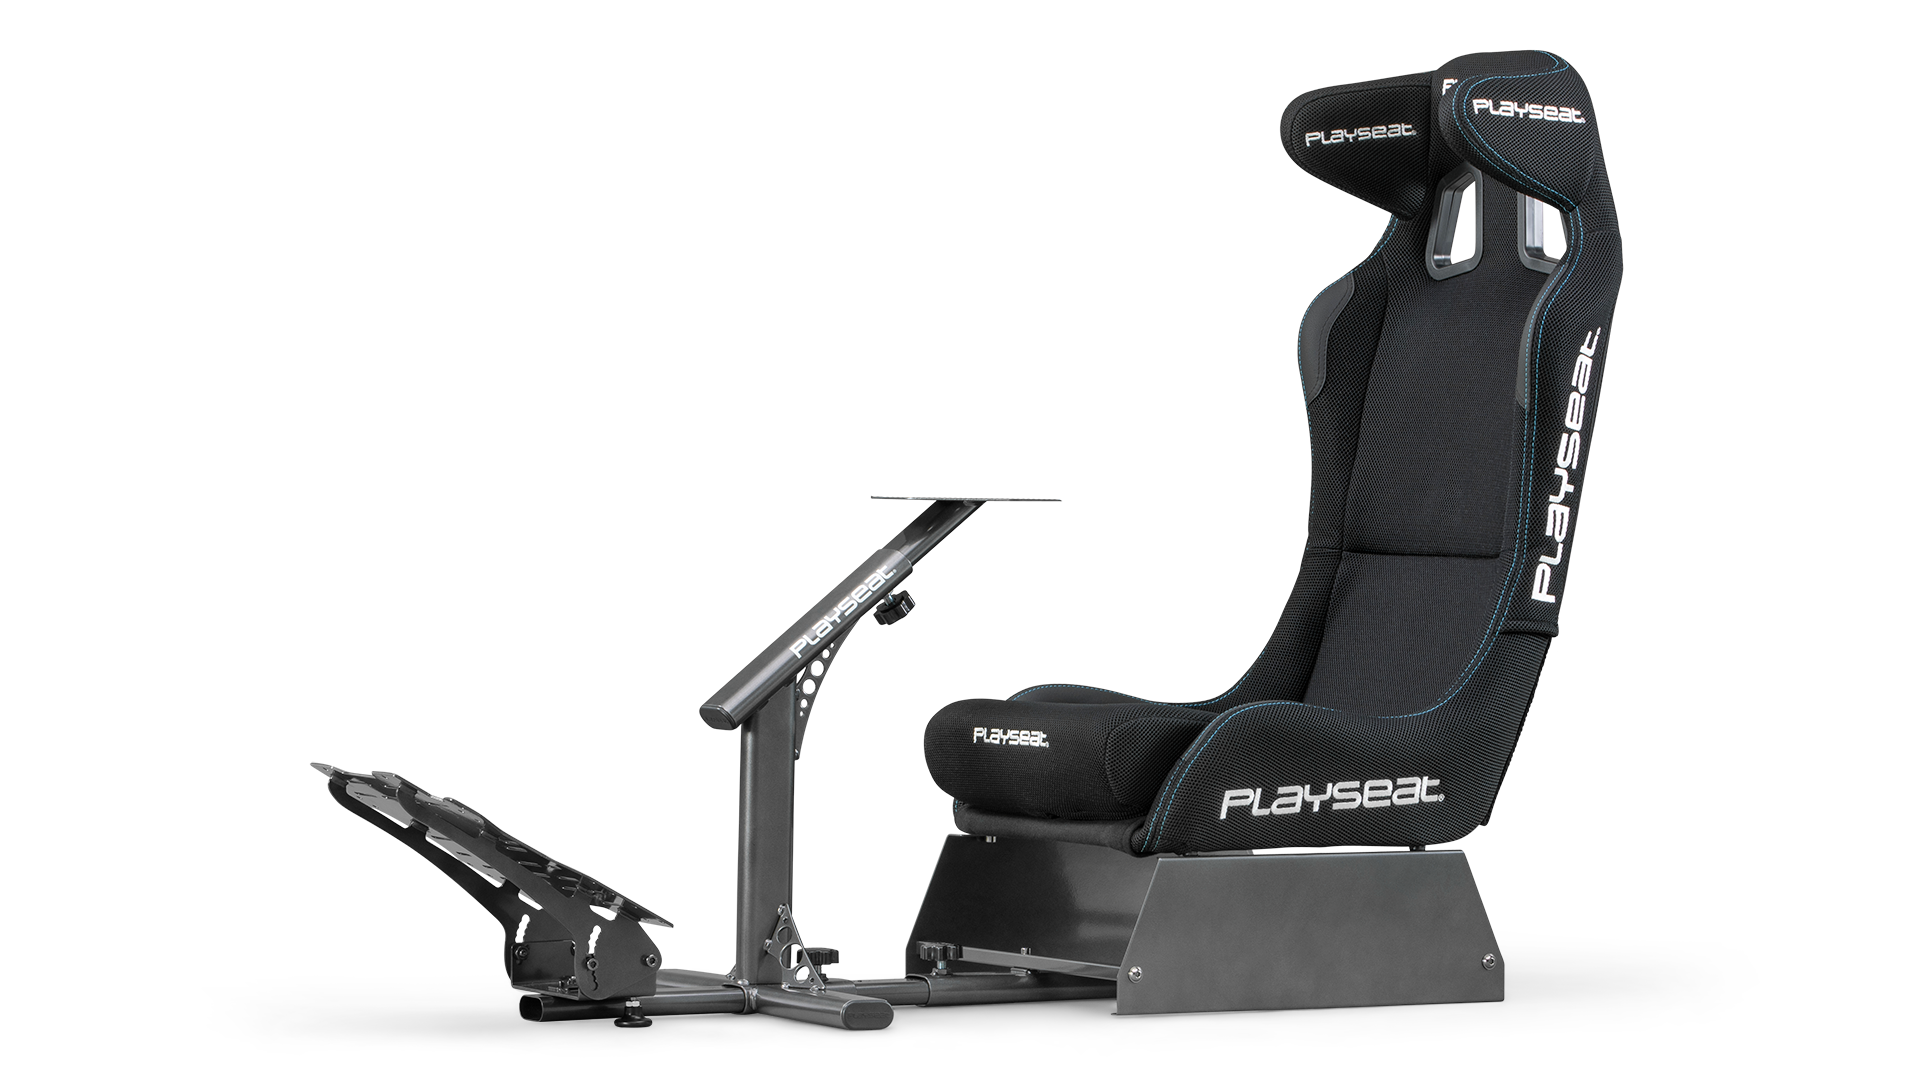 playseat-evolution-pro-black-actifit-racing-simulator-front-angle-view-1920x1080-1.png